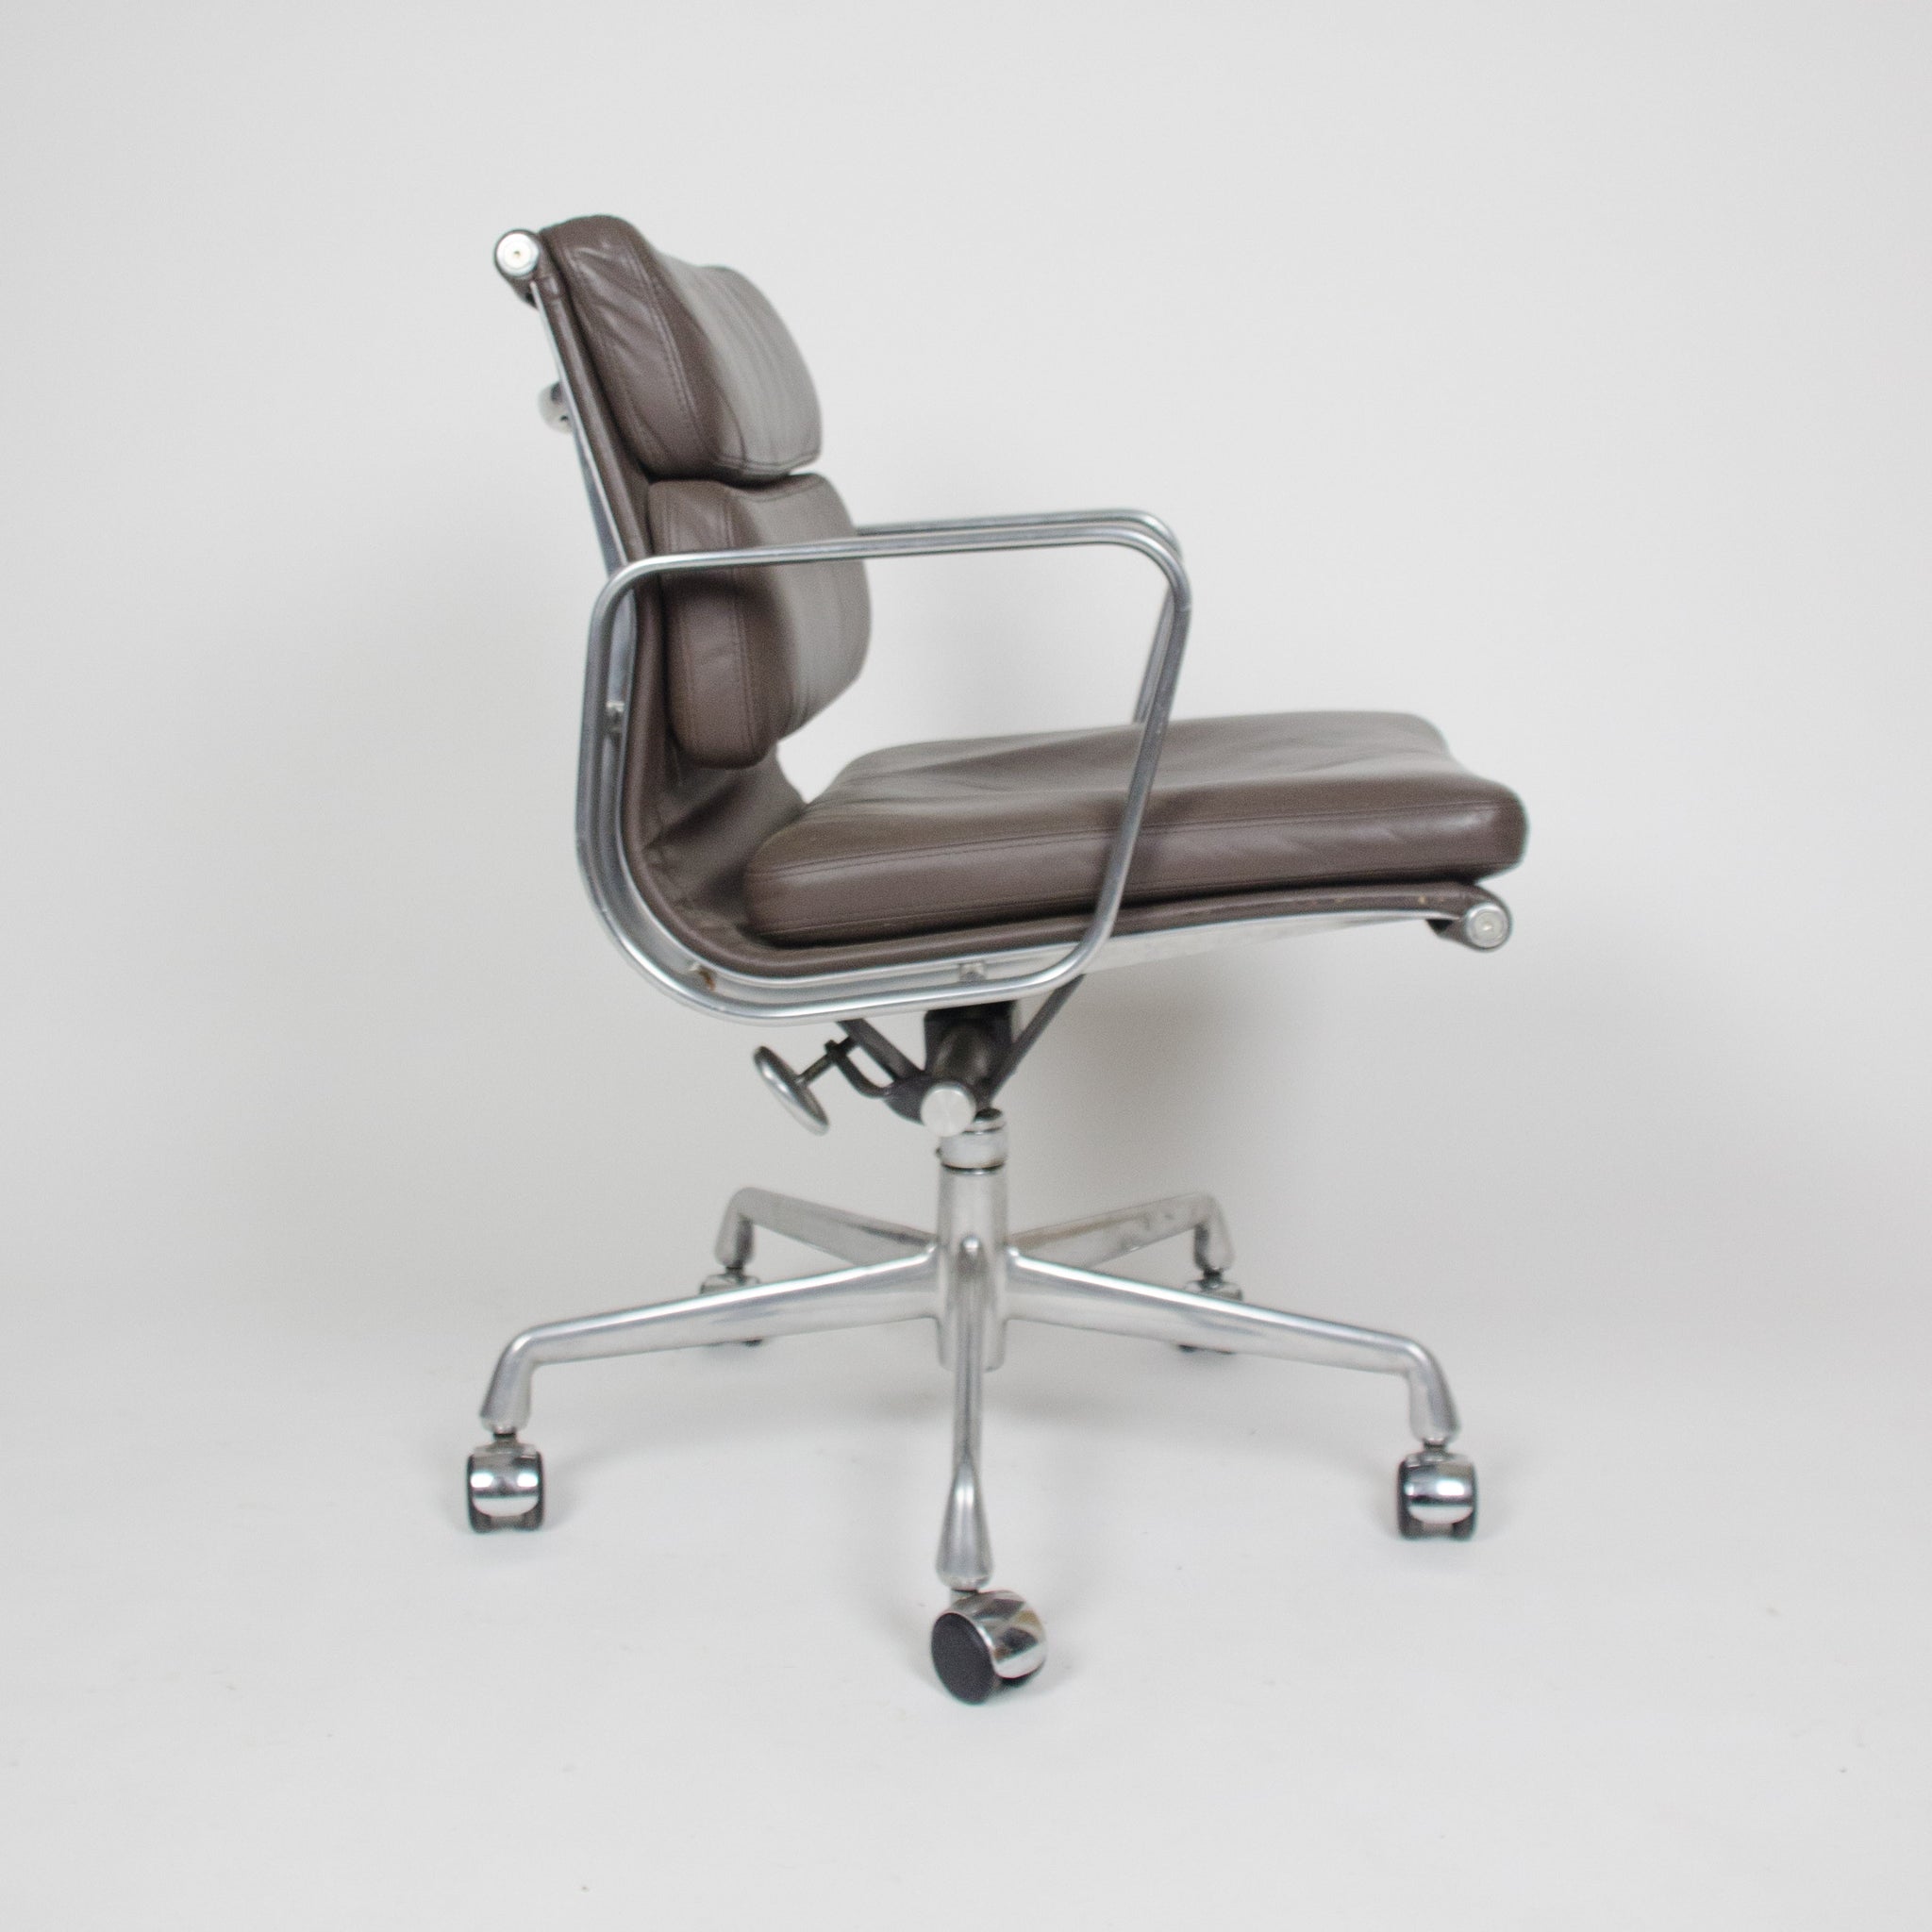 SOLD Eames Herman Miller Soft Pad Aluminum Group Chair Brown Leather Mint 3x